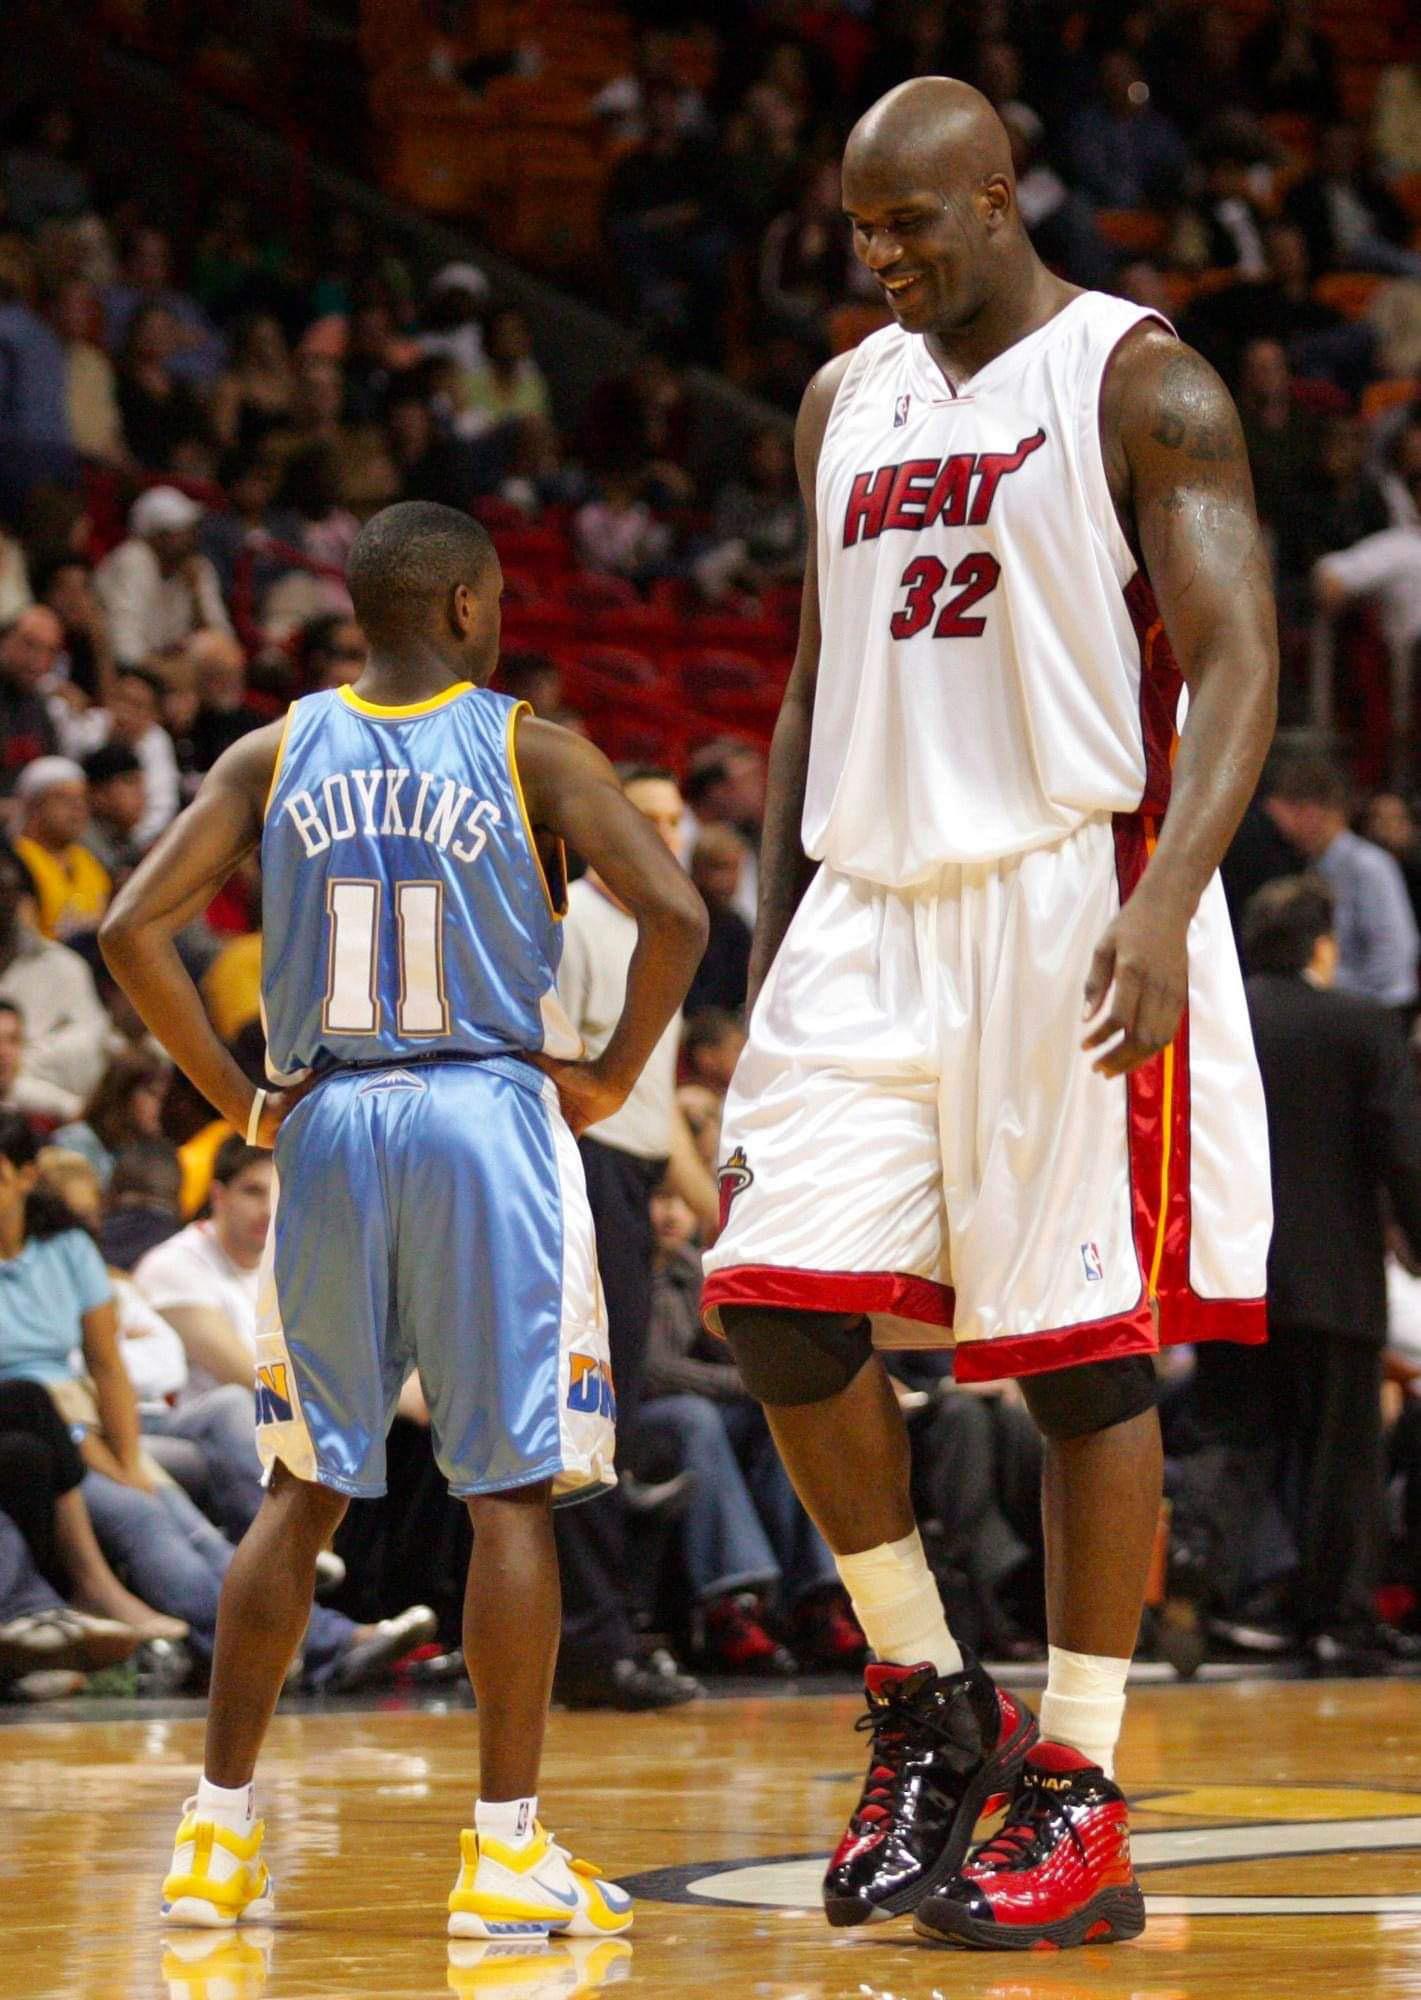 Boykins is the second shortest basketball player in the NBA